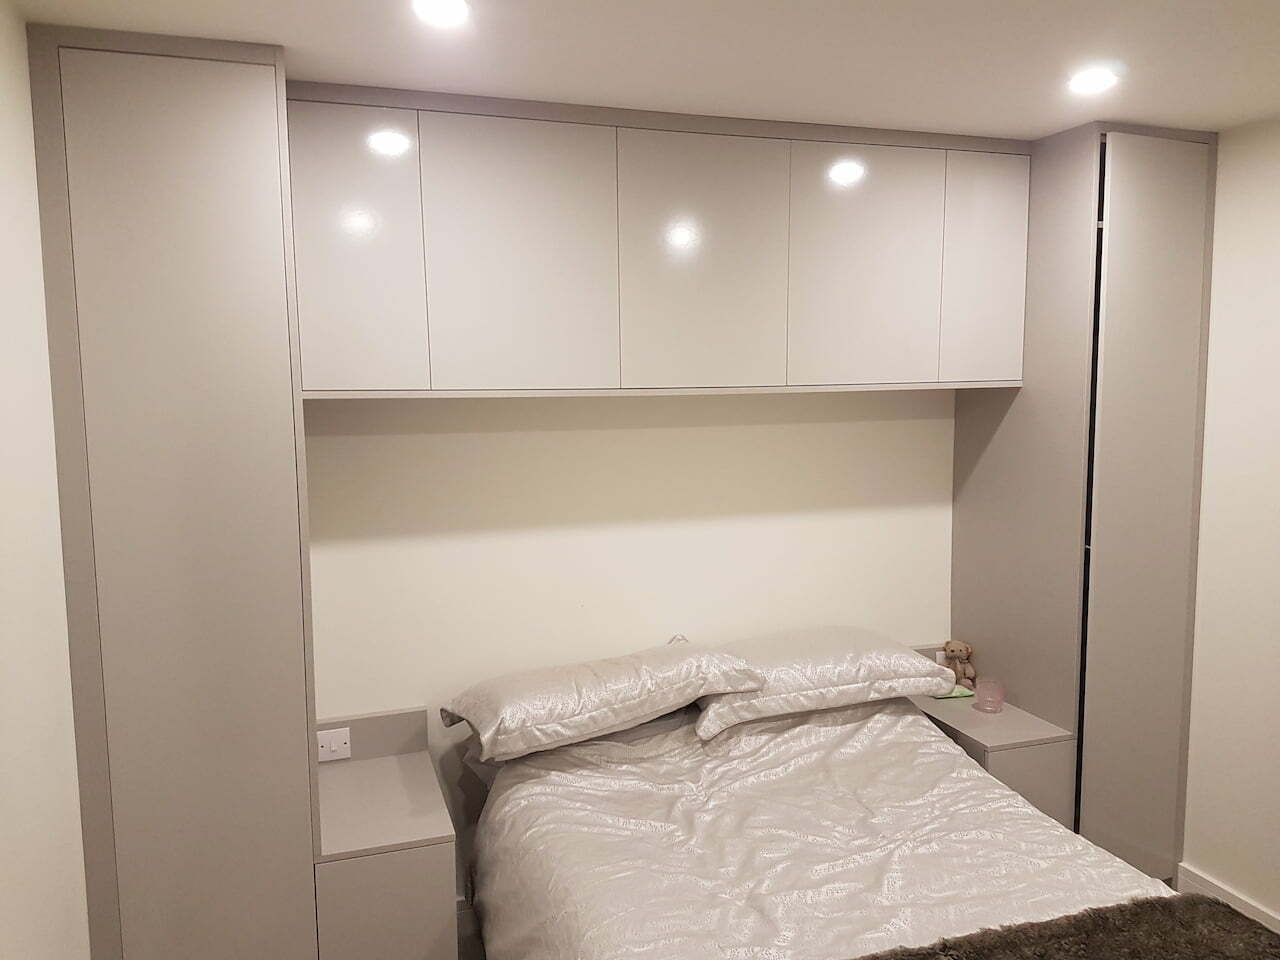 Overbed Fitted Wardrobes And Storage Units, Bespoke Overhead Storage Throughout Over Bed Wardrobes Sets (View 10 of 15)